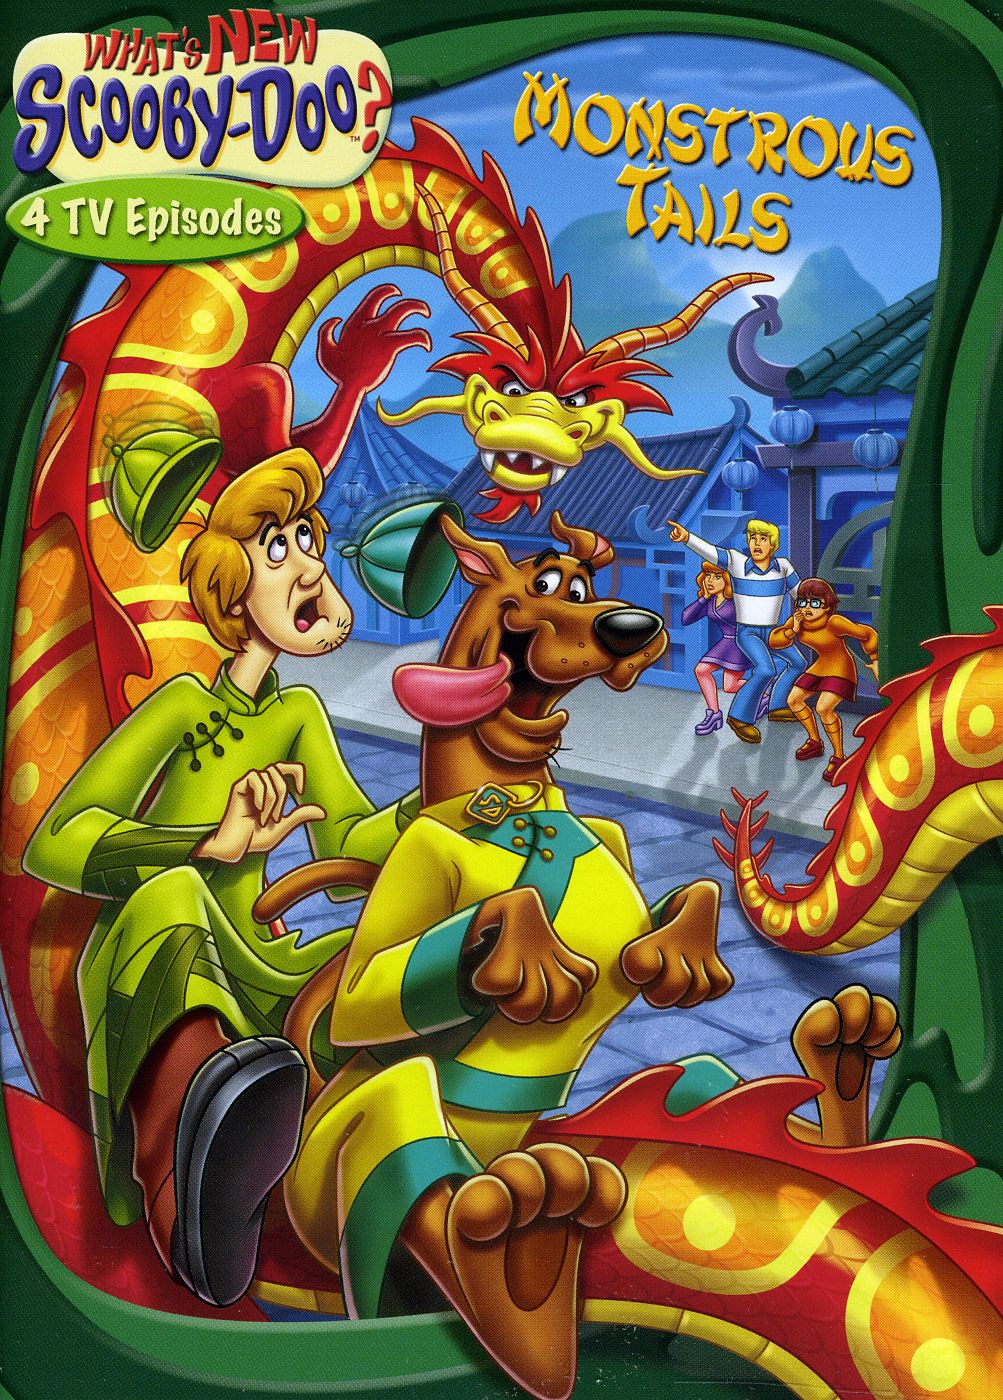 WHAT'S NEW SCOOBY DOO 10: MONSTROUS TAILS / (FULL)